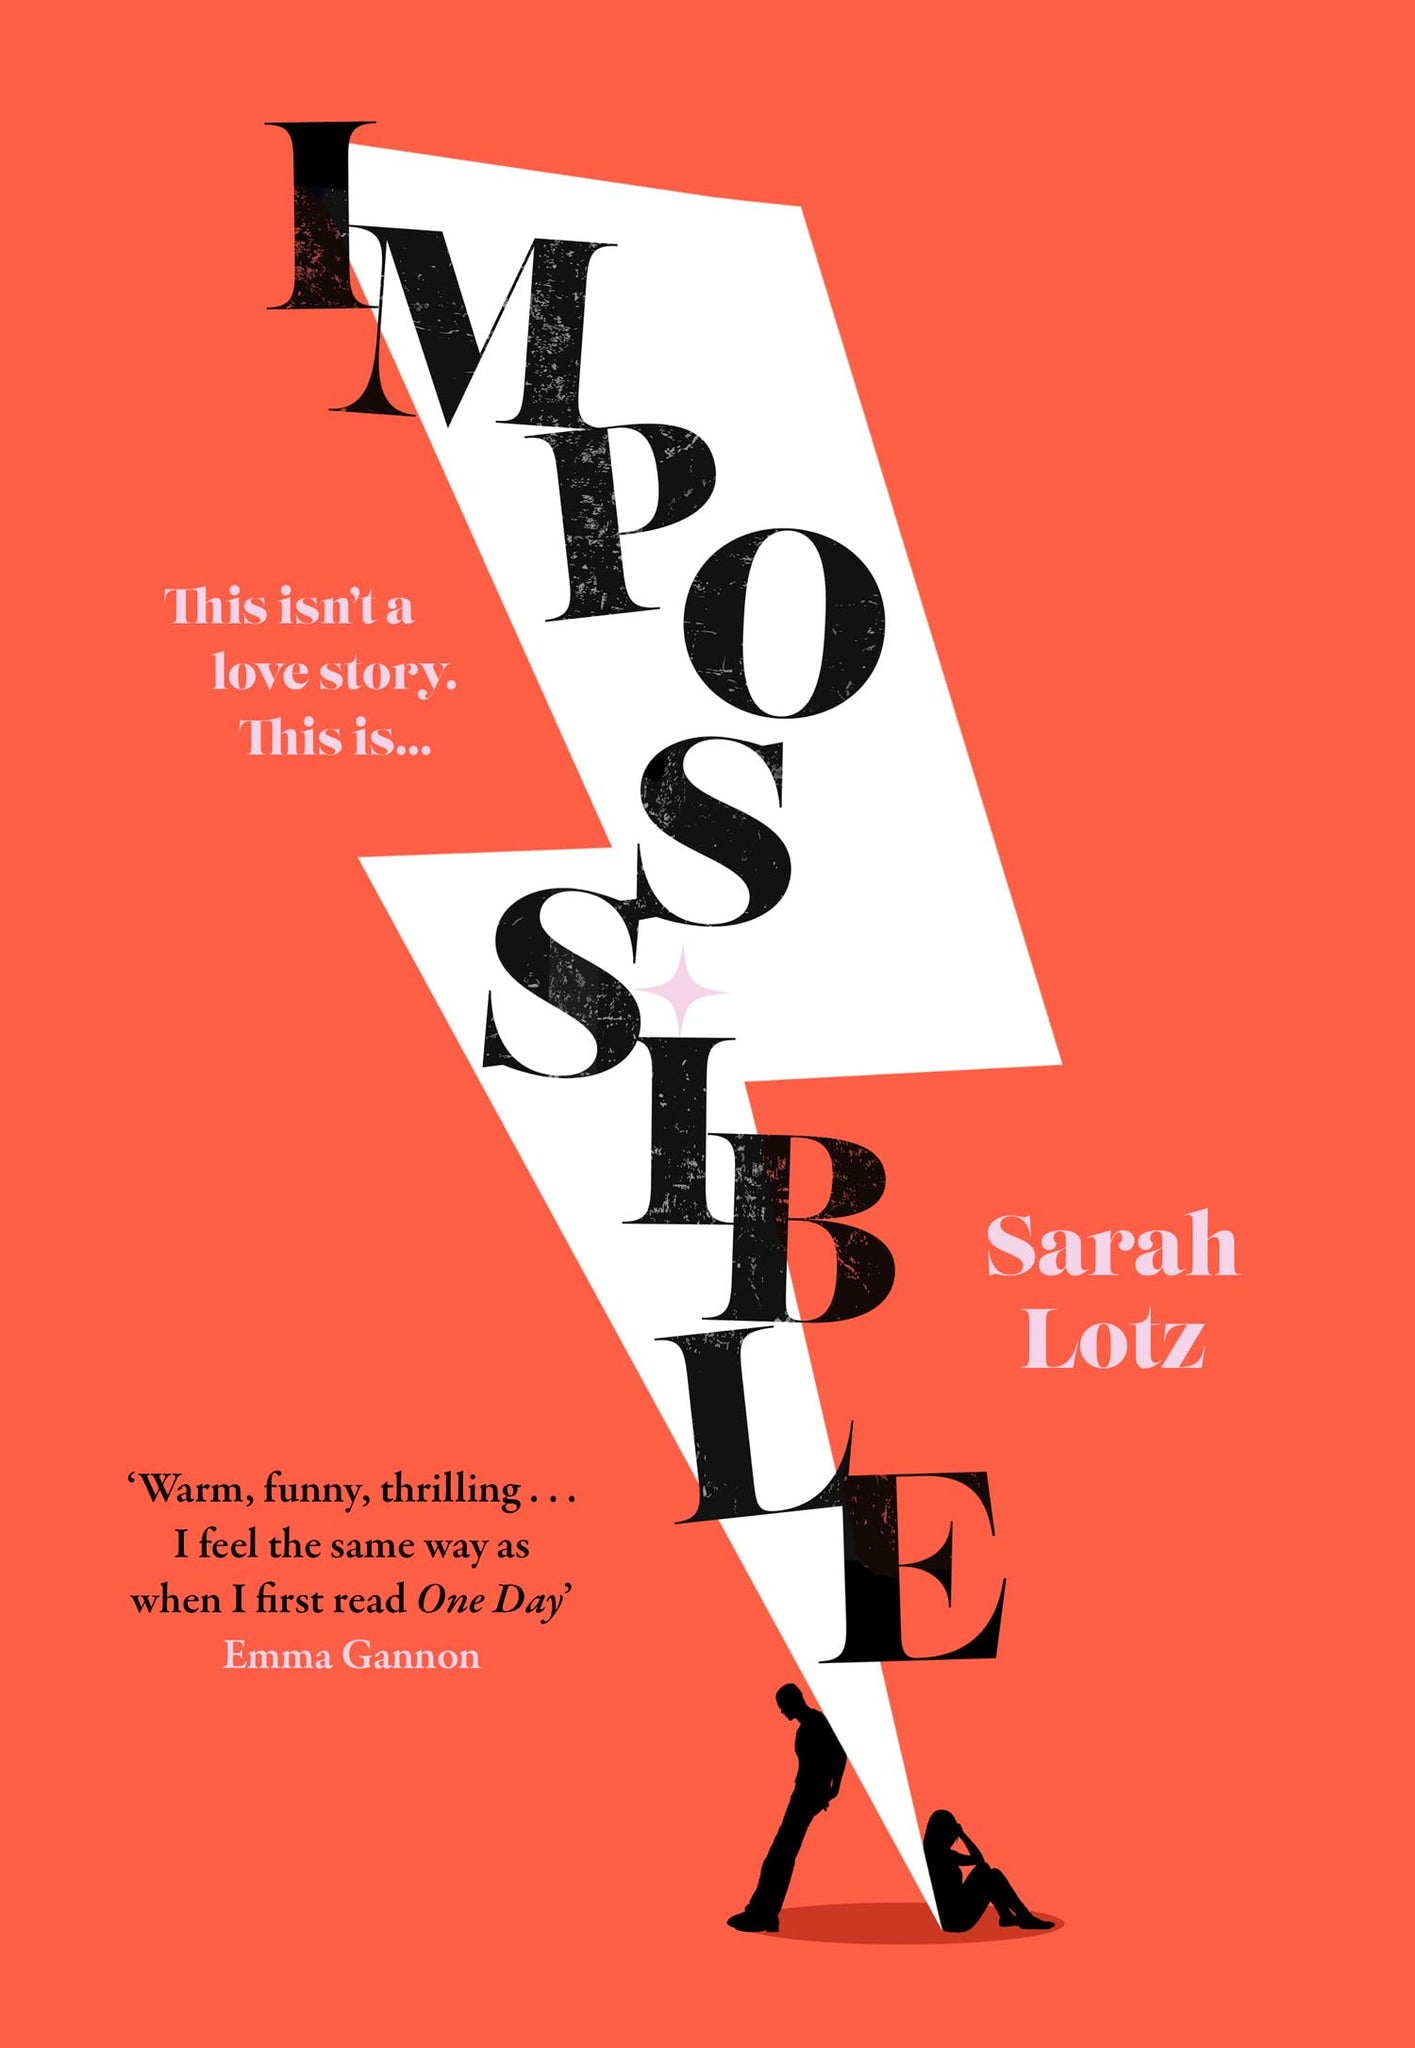 The Impossible Us by Sarah Lotz